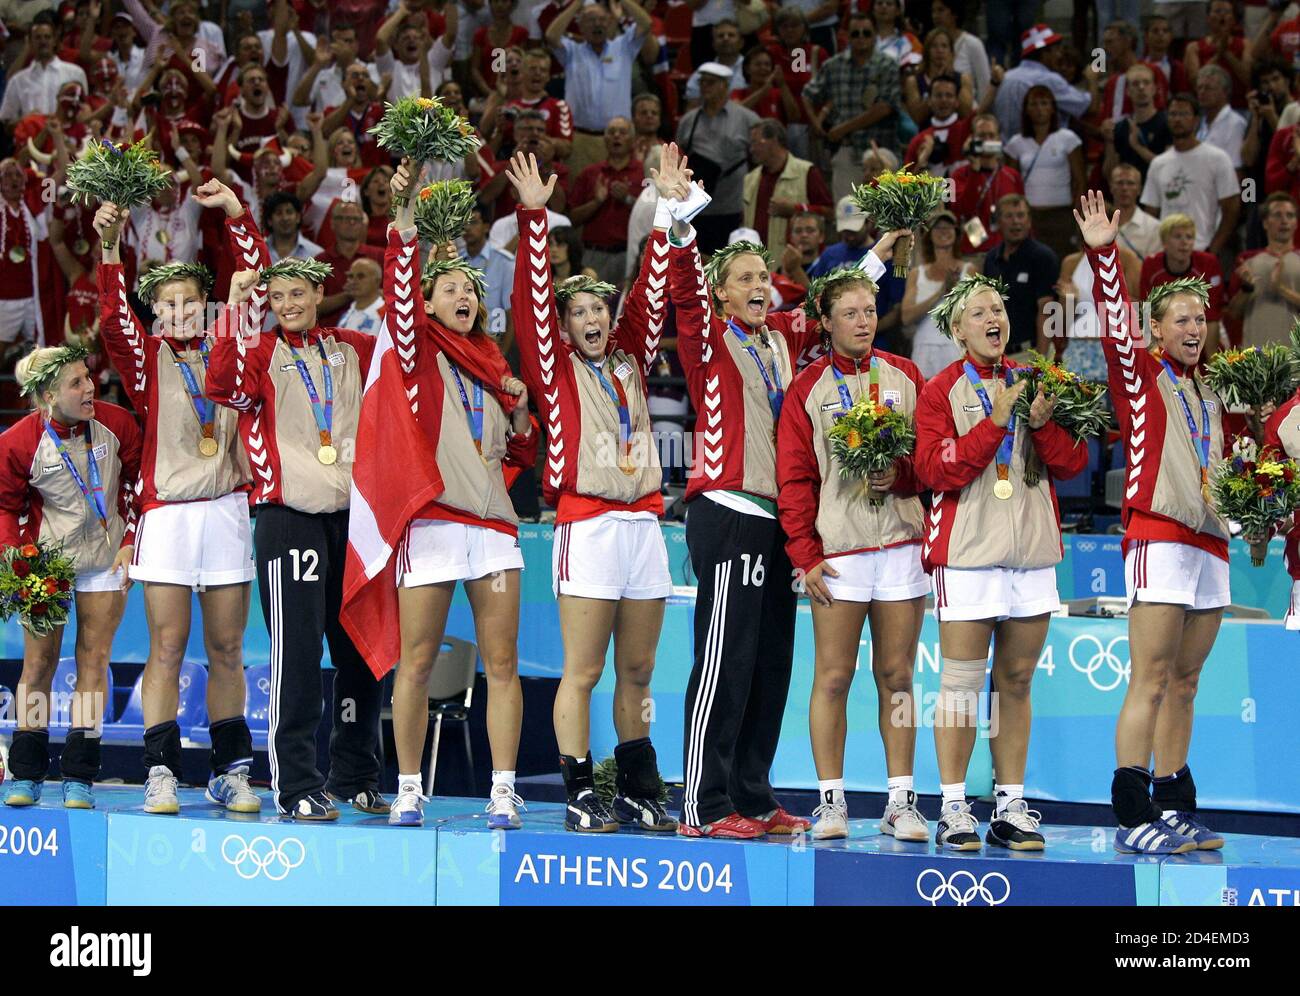 Danish women's Olympic handball champions raise their arms in unison during  the podium ceremony at the Athens 2004 Olympic Games, August 29, 2004.  Denmark defeated South Korea 38-36 on penalties to take